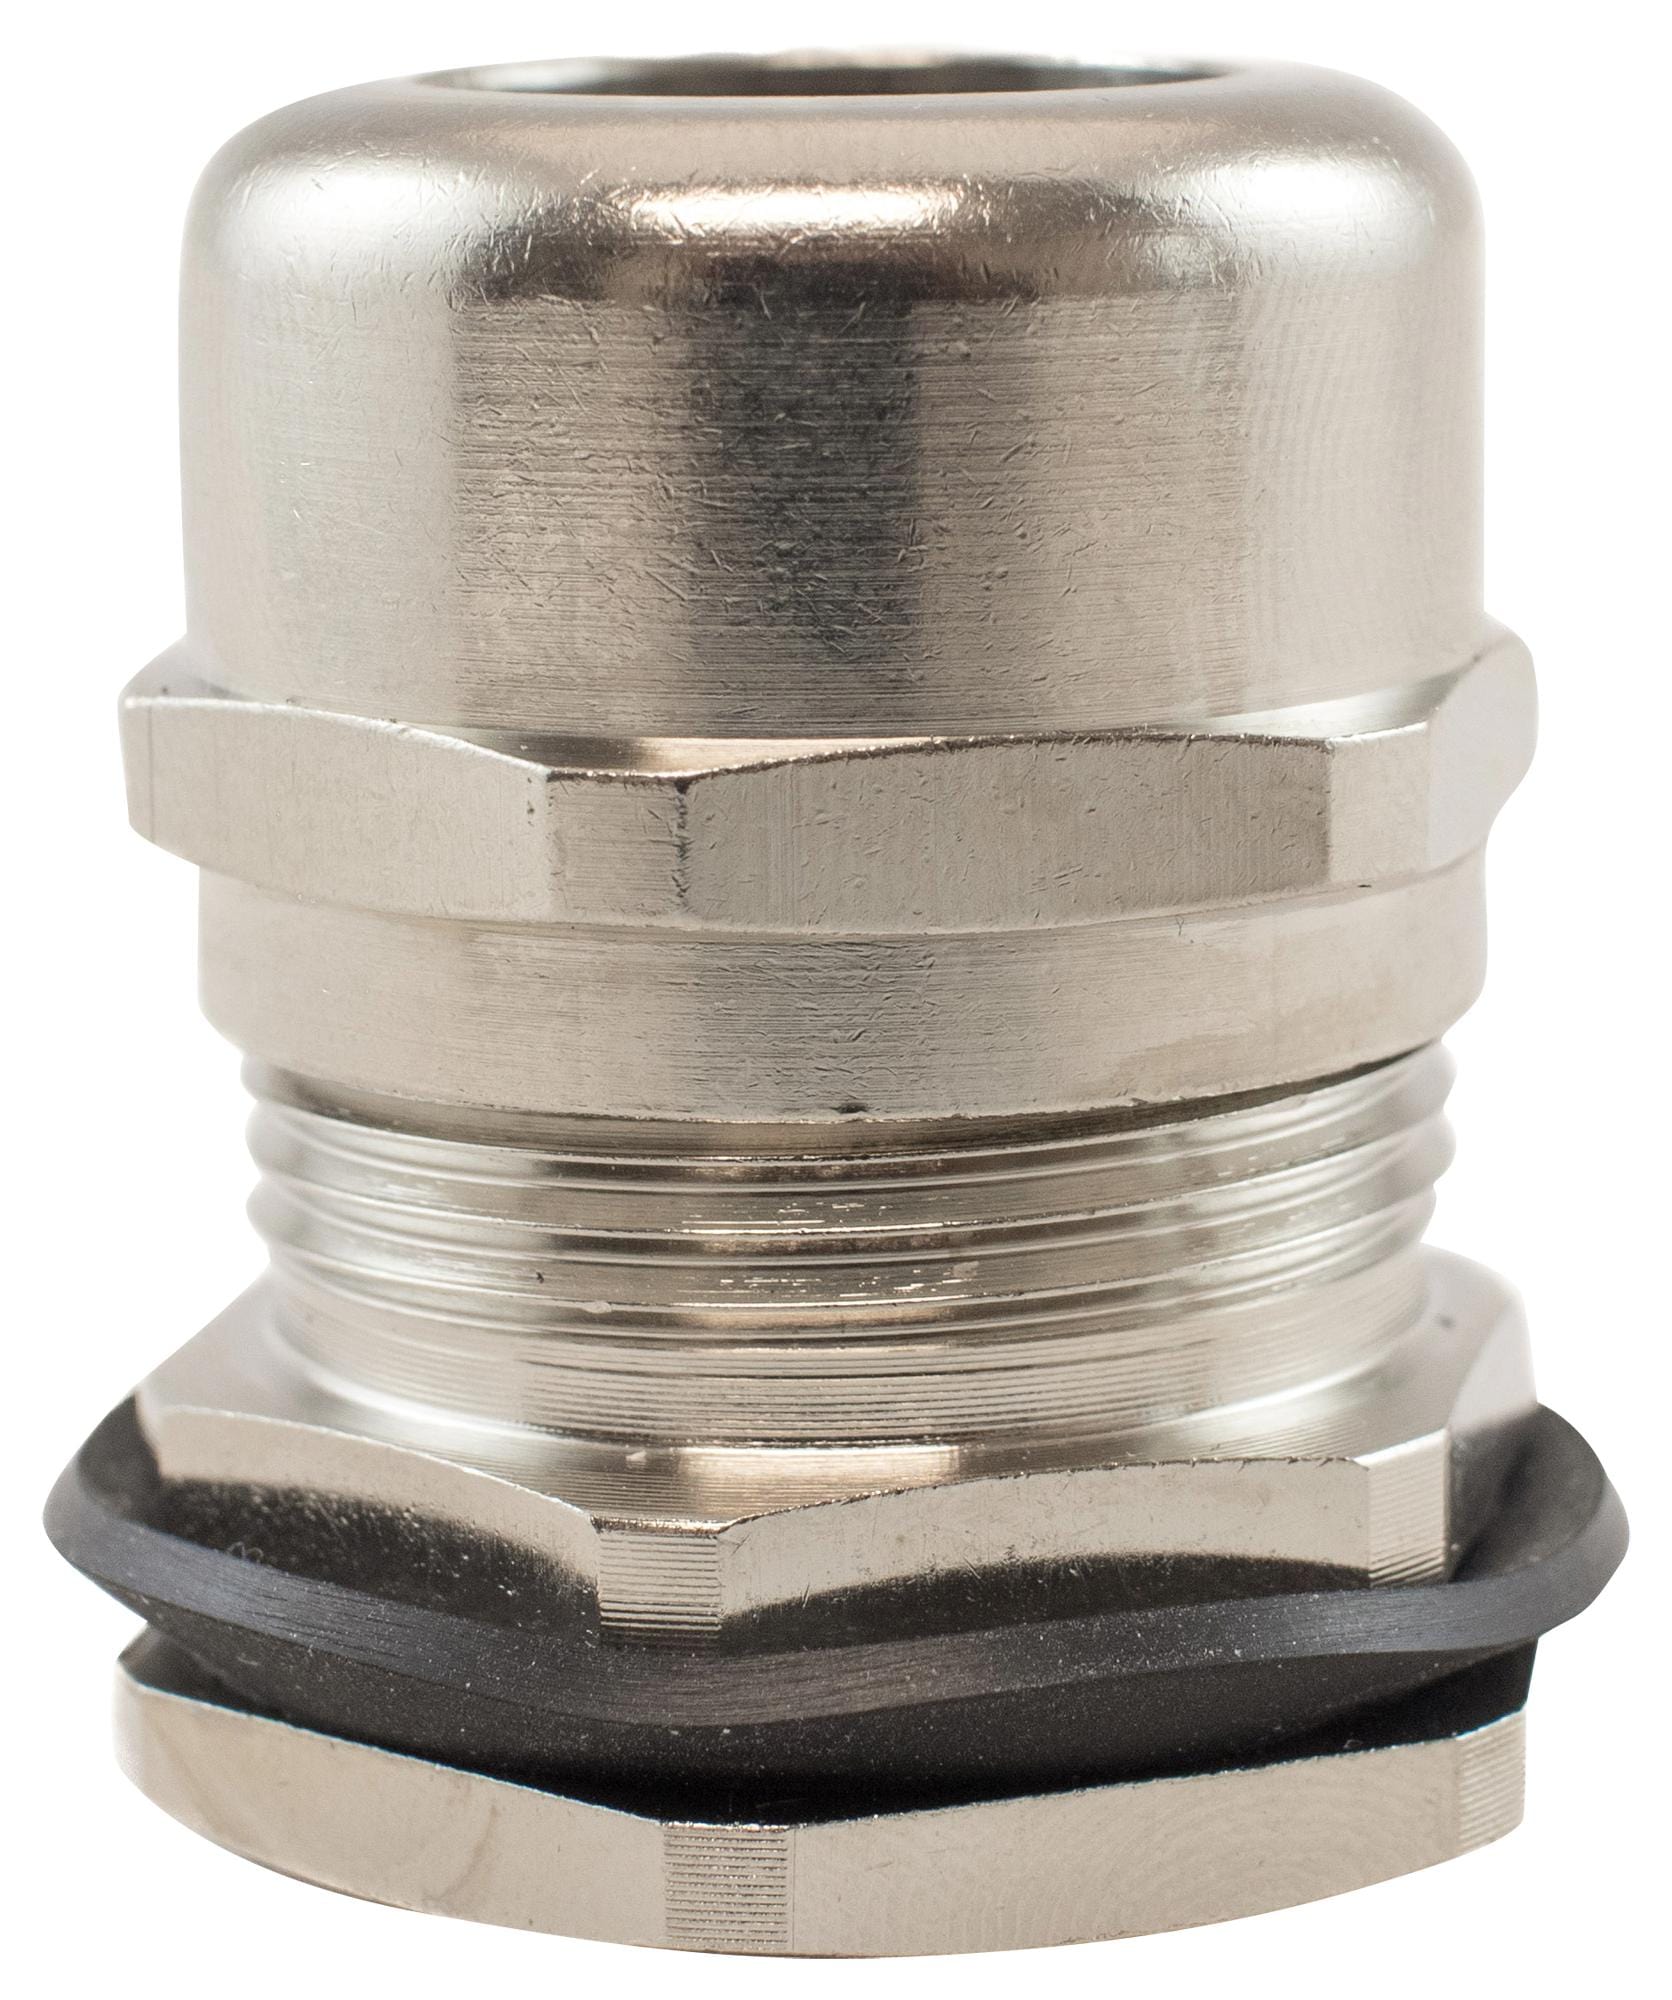 ALPHA WIRE Glands MPG21 NC080 CABLE GLAND, PG21, BRASS, 13-18MM ALPHA WIRE 2891964 MPG21 NC080